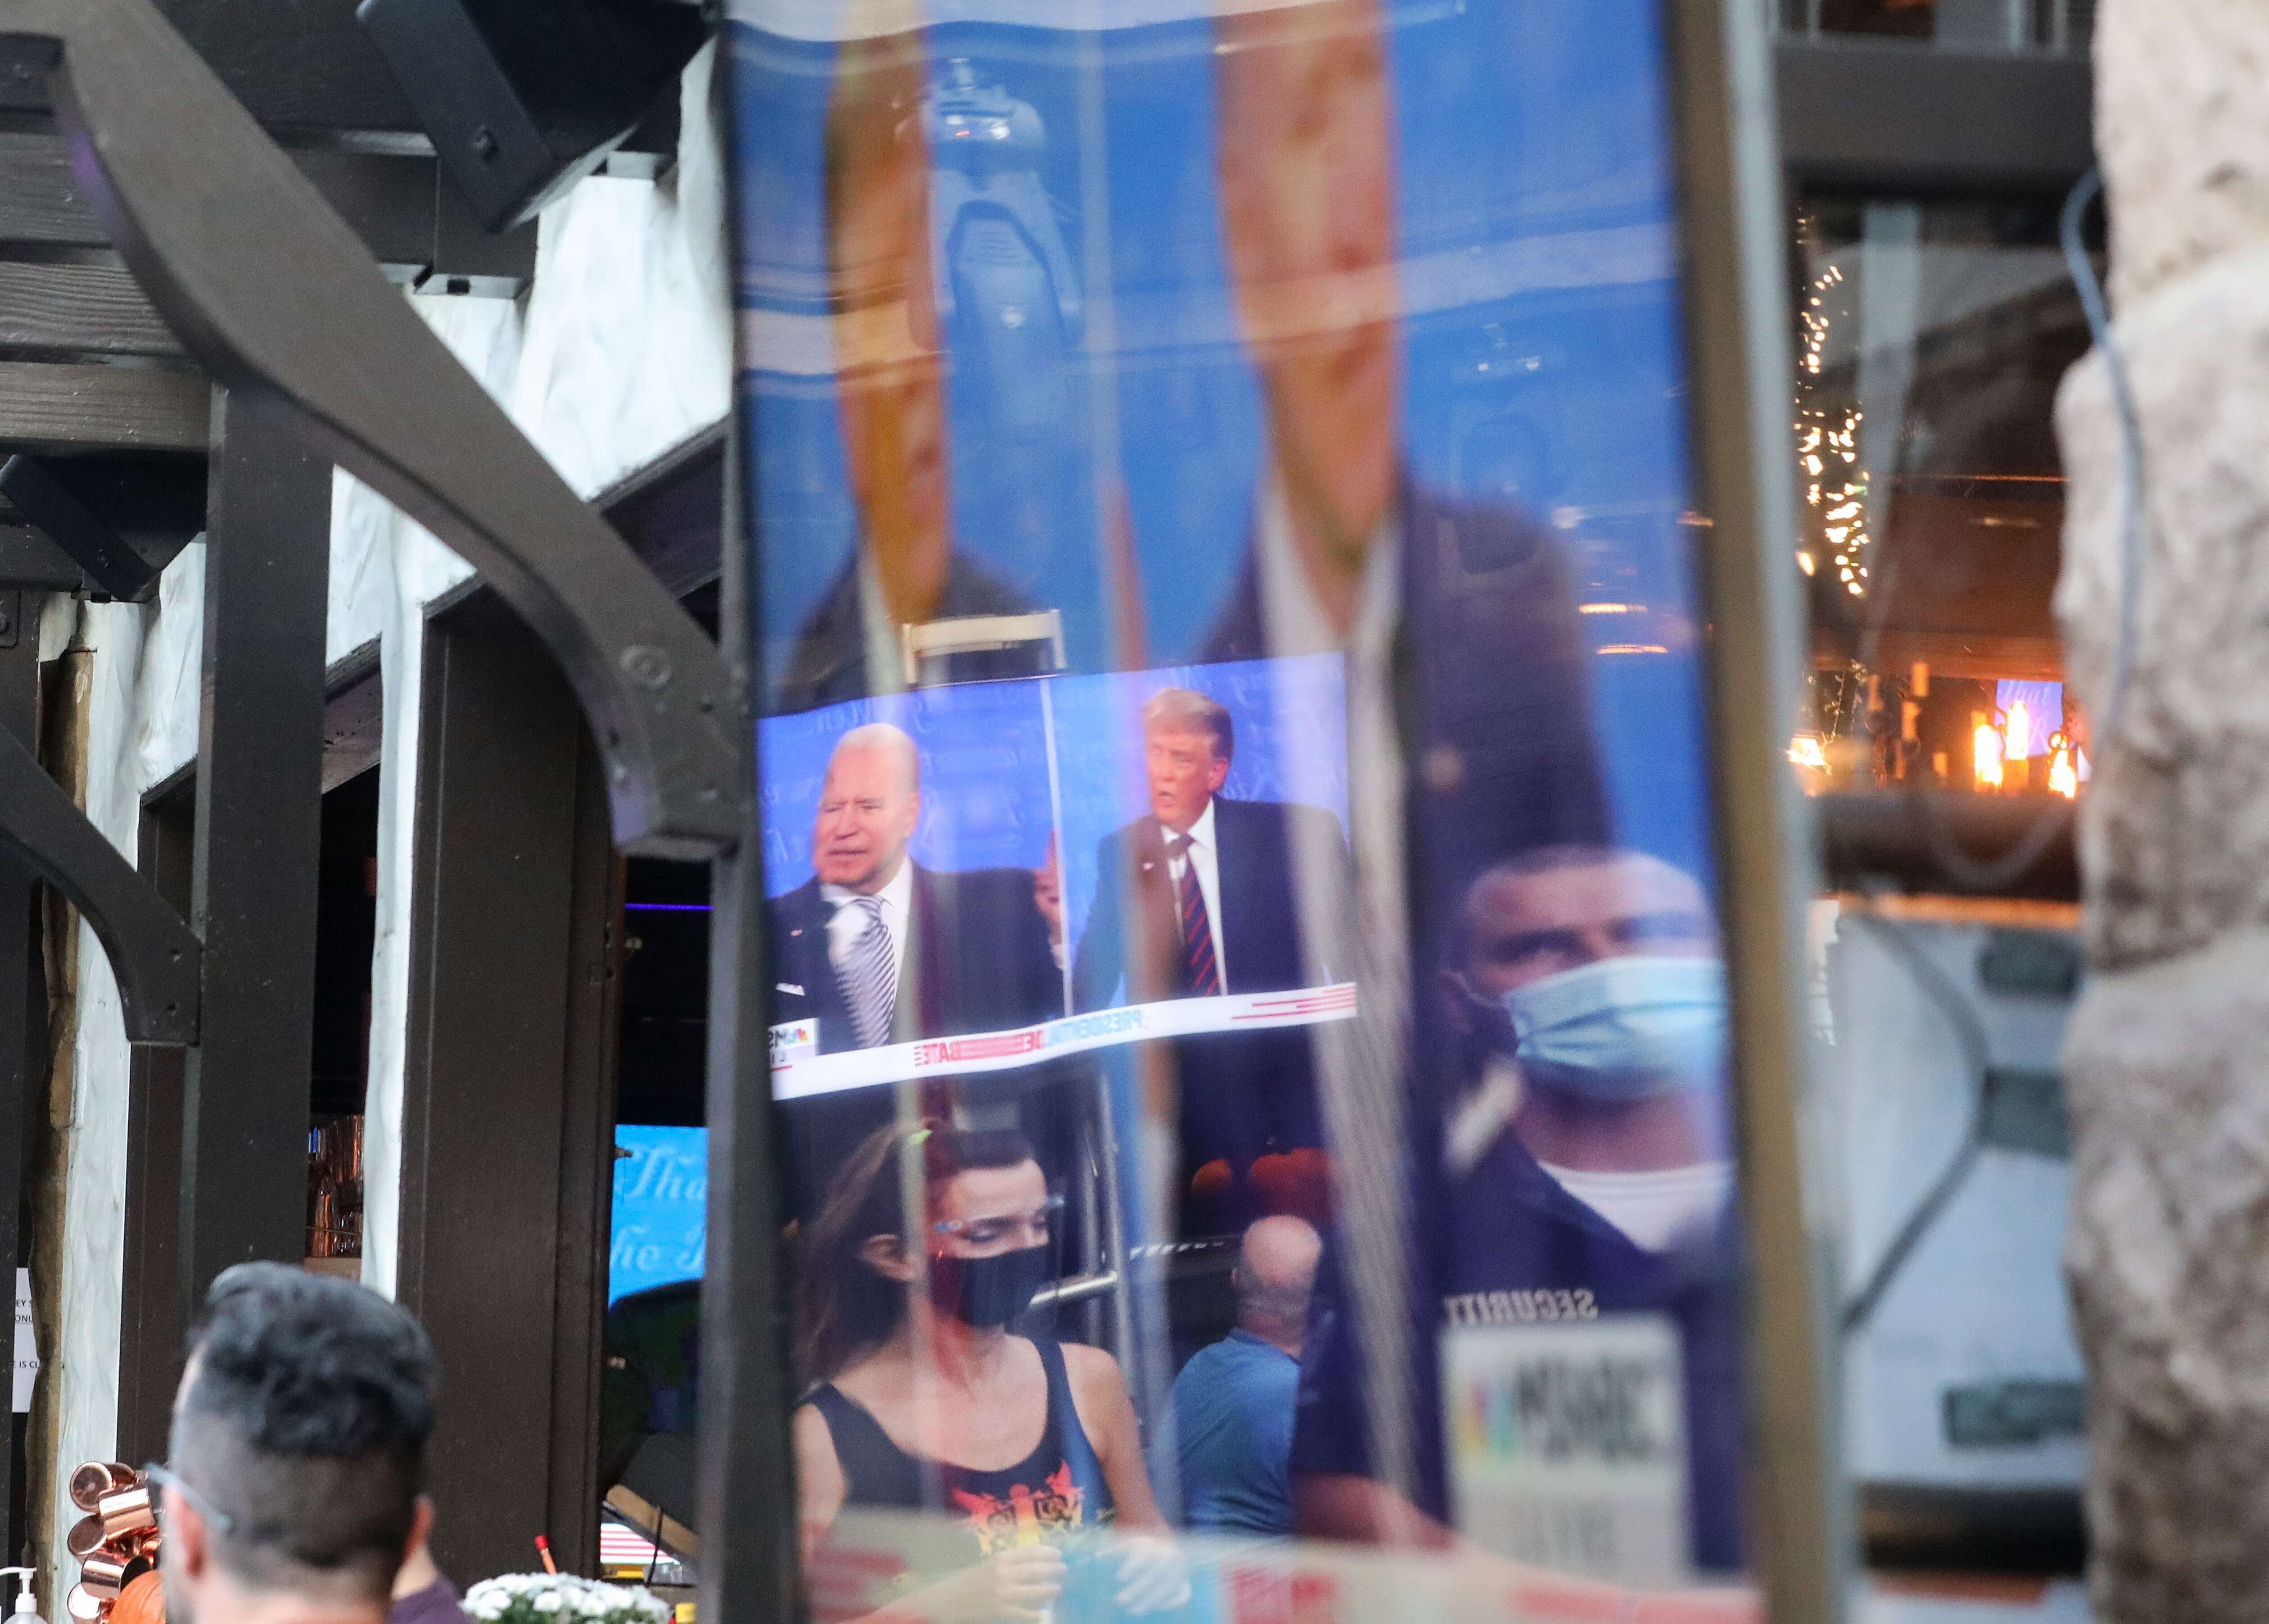 People wearing face coverings are reflected in a television screen during the first debate between President Donald Trump and Democratic presidential nominee Joe Biden. Photo: AFP